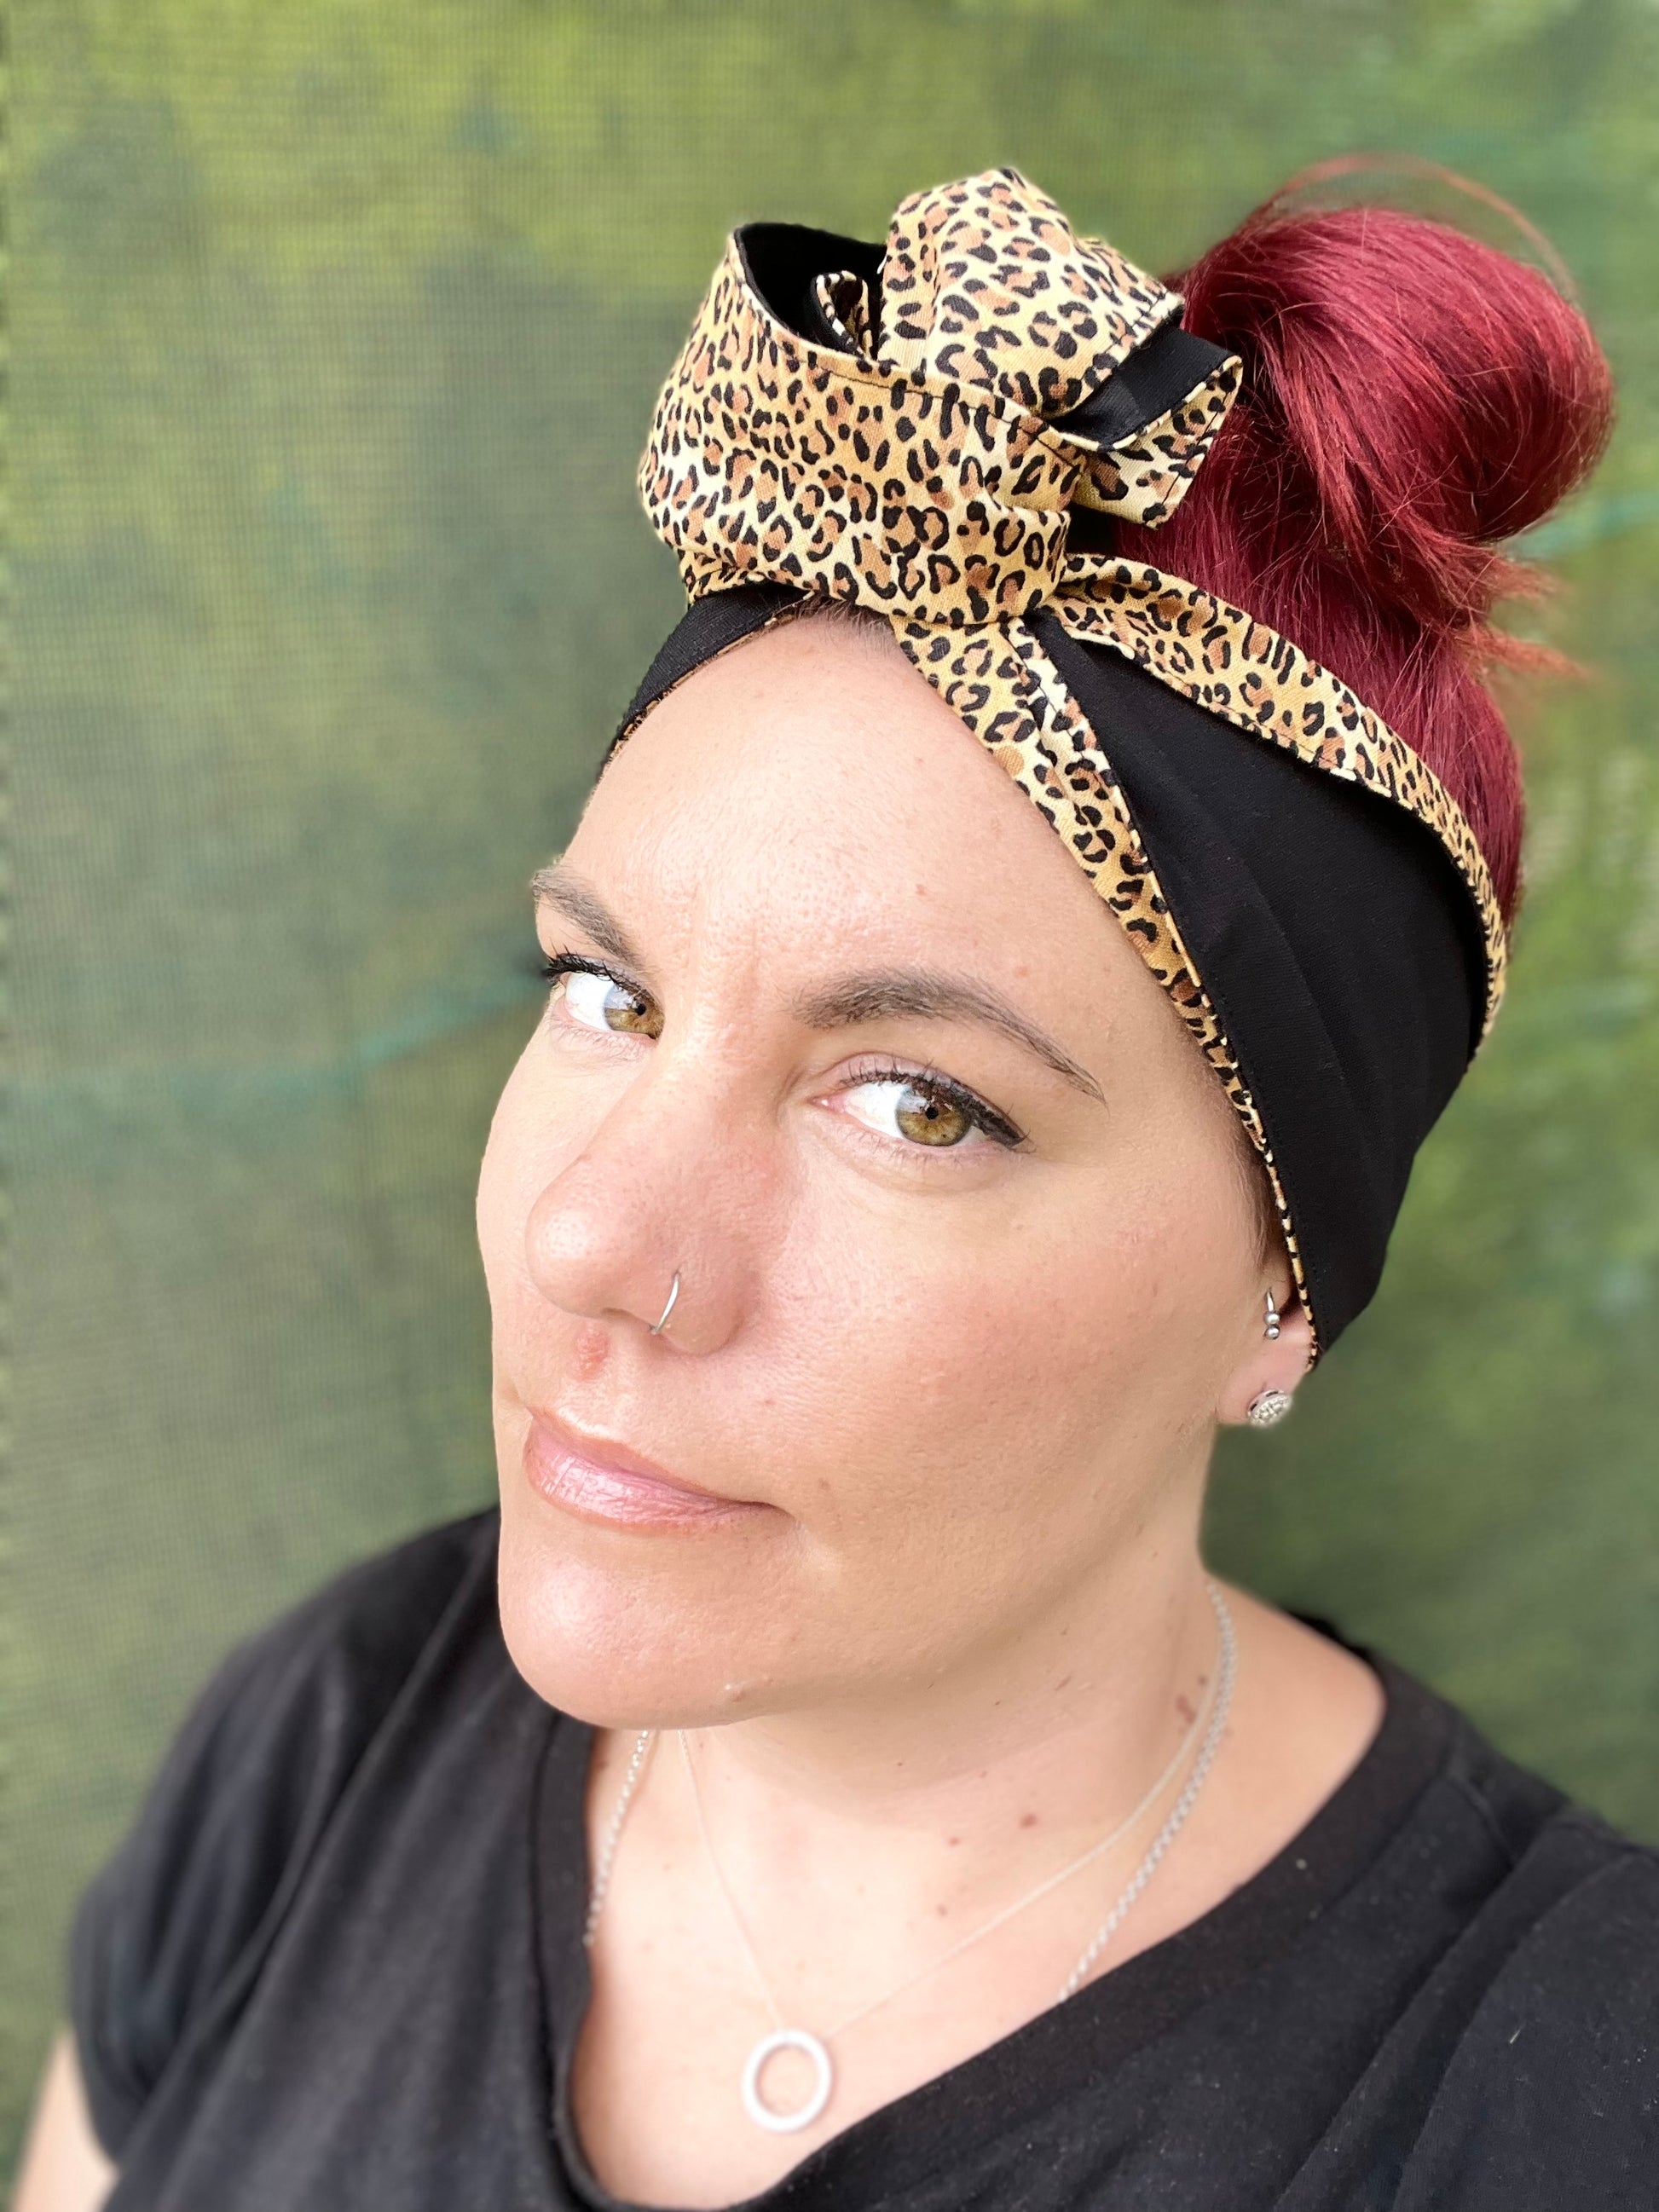 Leopard on Black Boho Wire Headband - Bae Bands Australia Twist Bow Wire Headband allows for your headband to stay in place all day with no headaches,